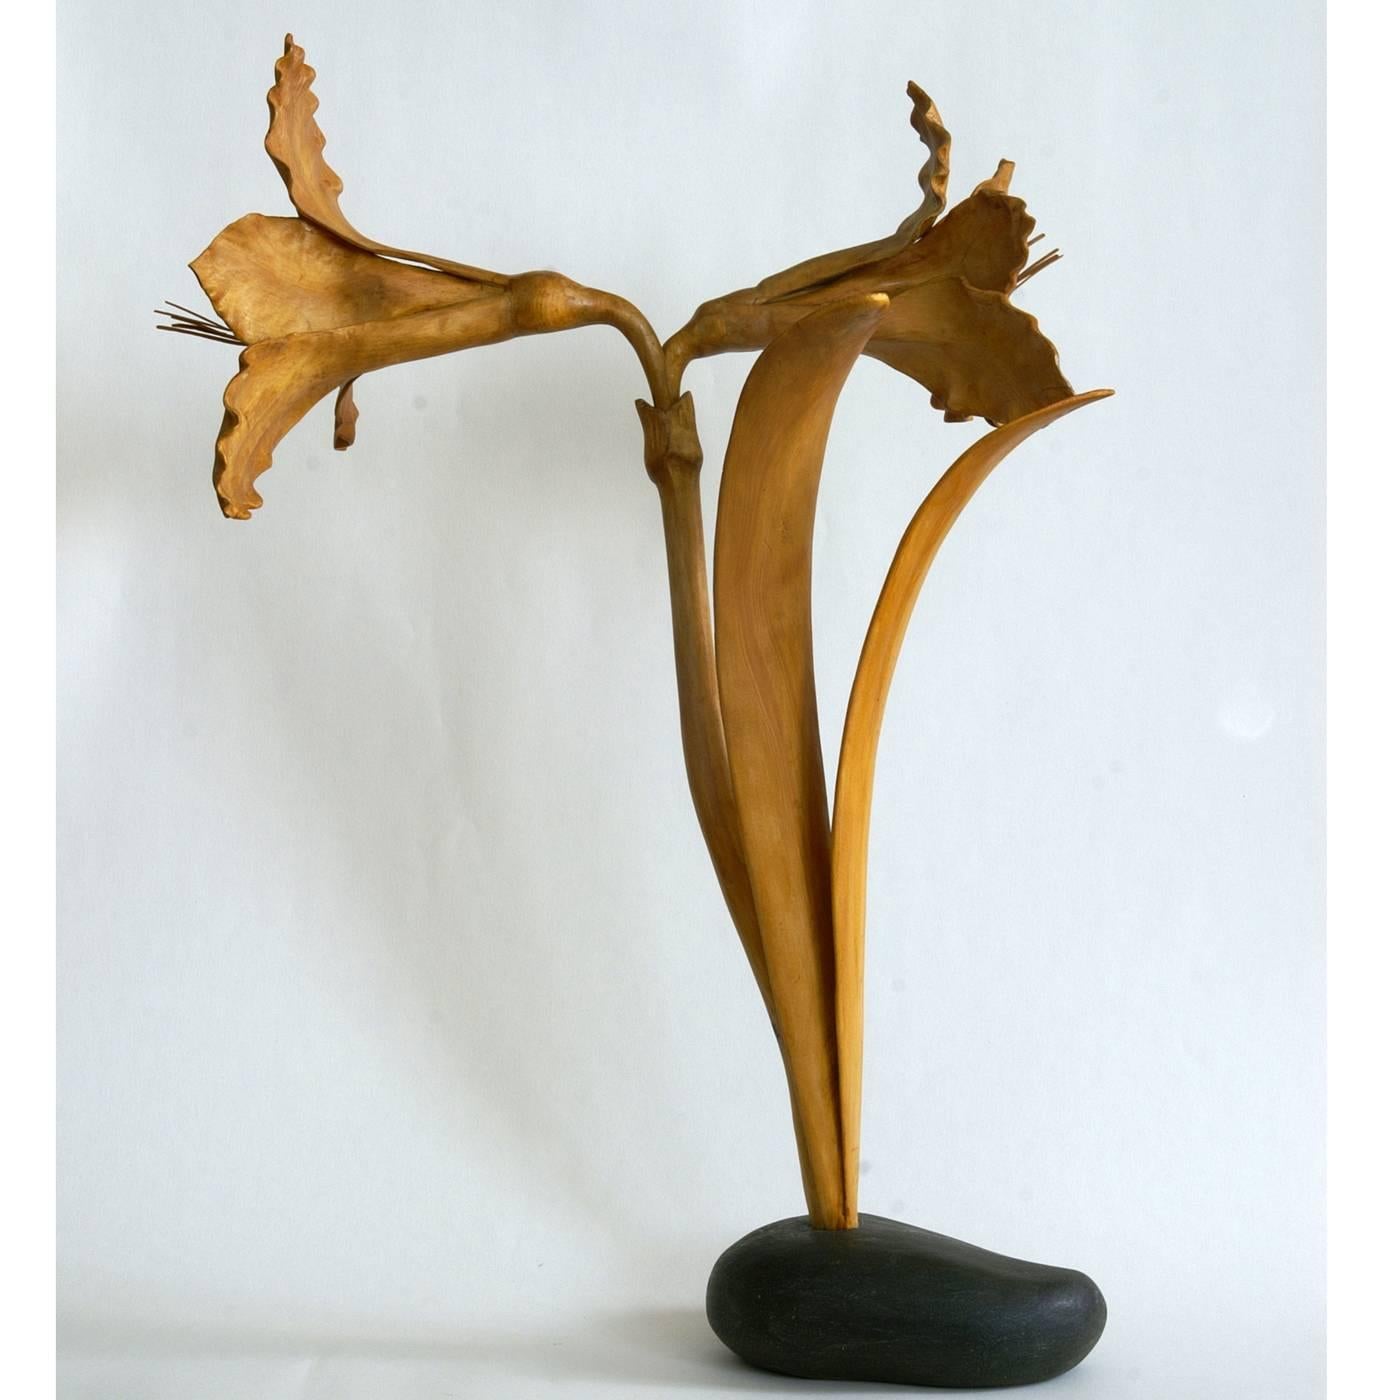 This delicate sculpture of an Amaryllis flower in bloom is entirely hand-carved in Swiss pinewood, painted by hand using natural pigments, and then lacquered for a glossy finish. The Swiss pine wood base is hand-carved into the shape of a stone and